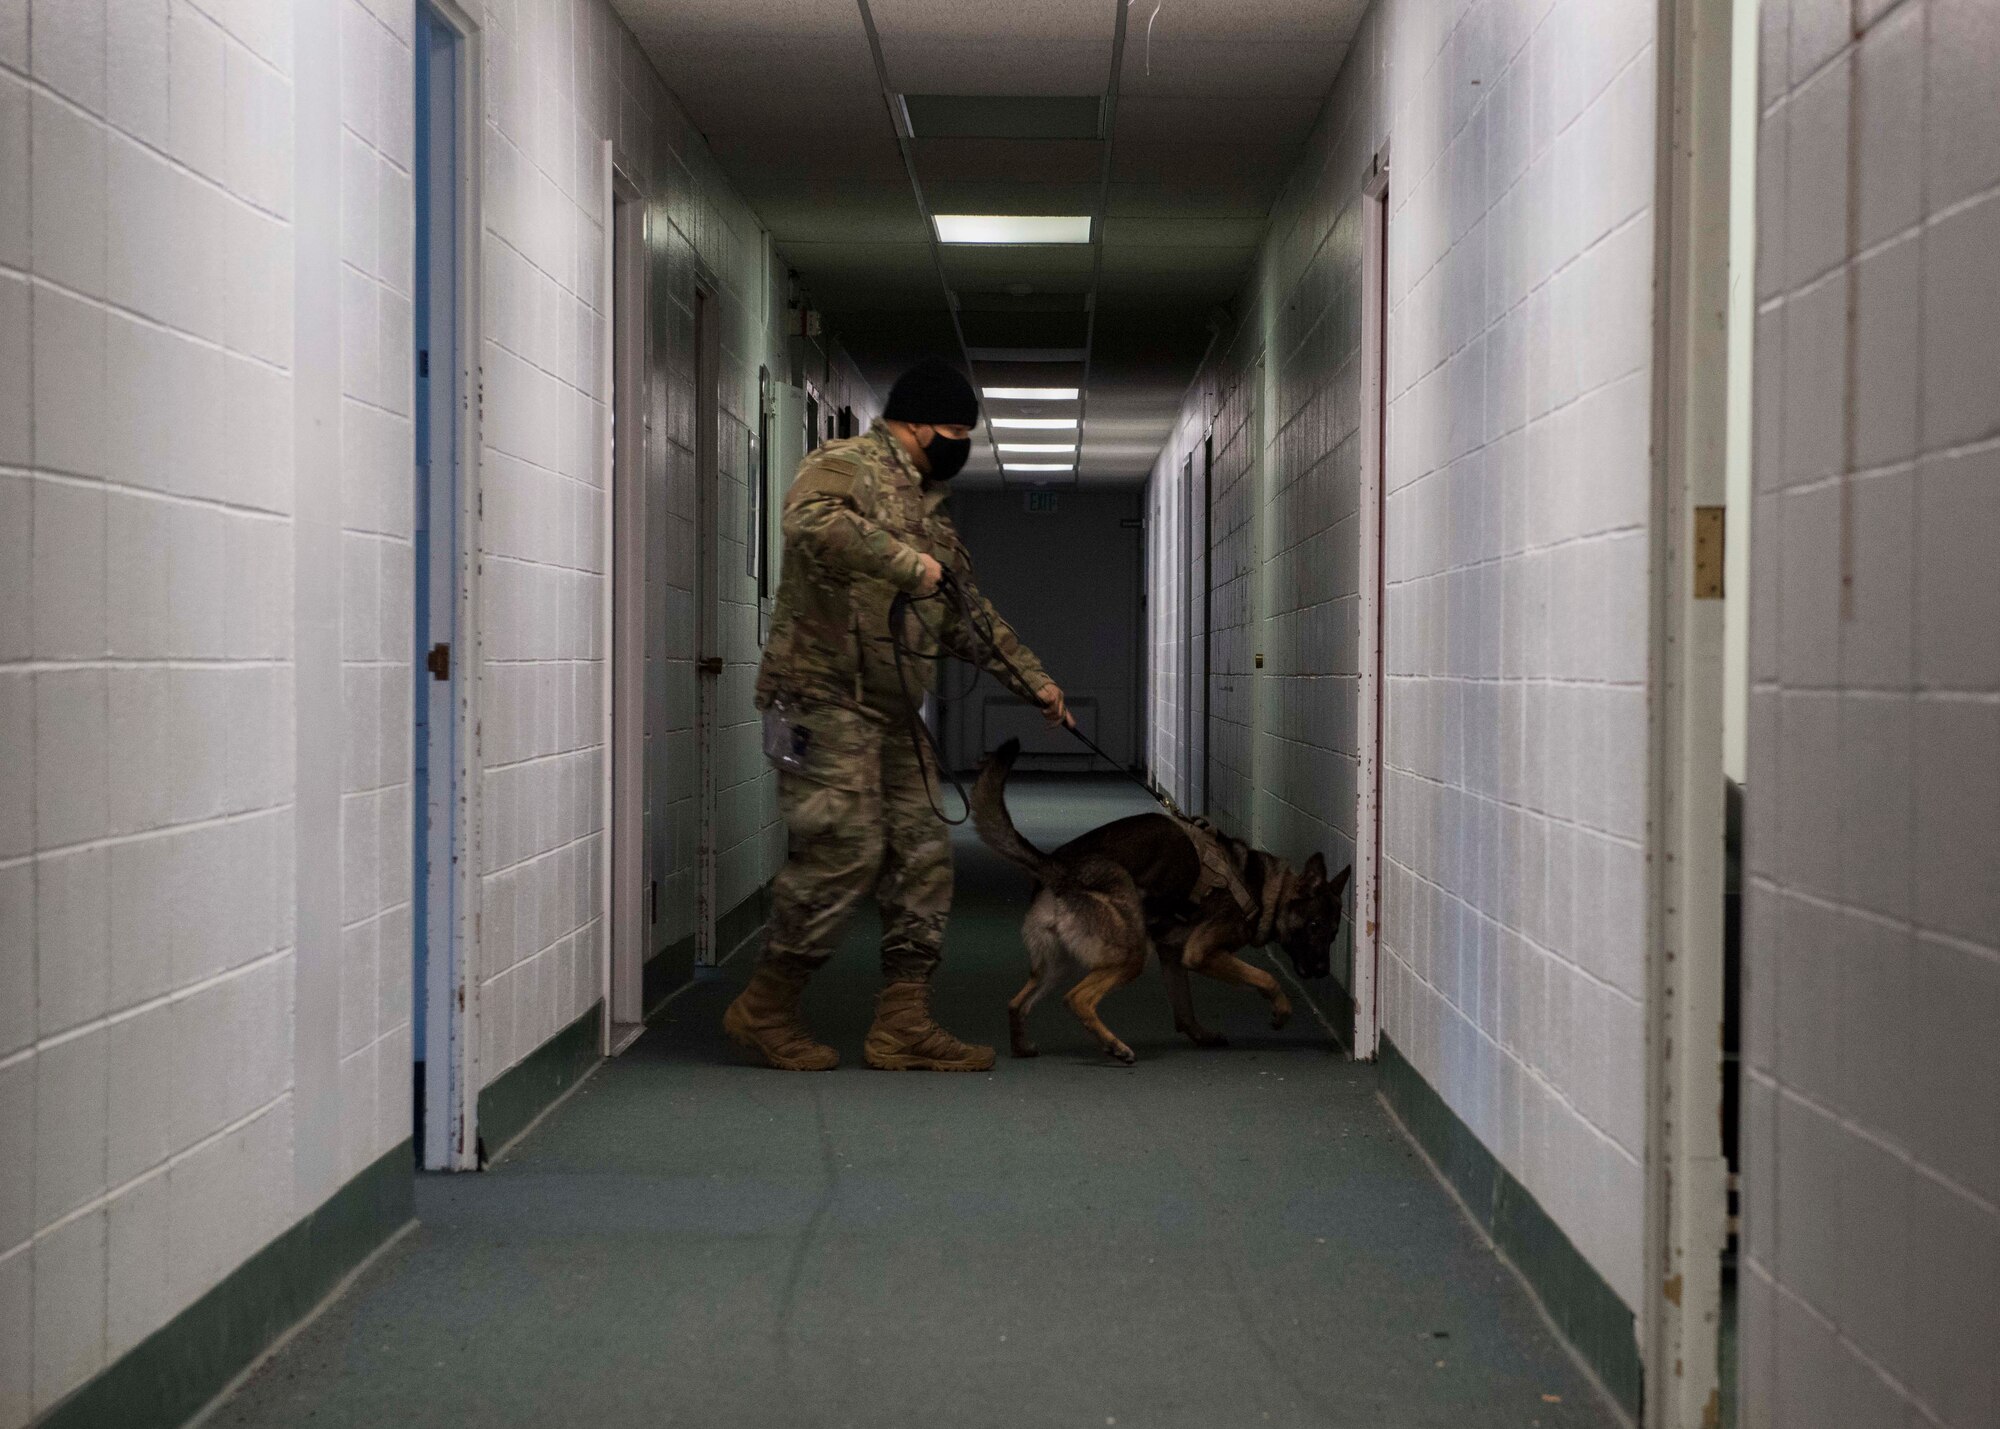 U.S. Air Force Staff Sgt. Dominic Williams, a 673d Security Forces Squadron military working dog (MWD) handler, and MWD Evelyn, a 673d SFS K-9, perform building search training during an immersion with the 673d SFS at Joint Base Elmendorf-Richardson, Alaska, Feb. 2, 2021. The tour familiarized base leadership with the 673d SFS and its role in maintaining the safety of the JBER community and security of the installation and its resources.